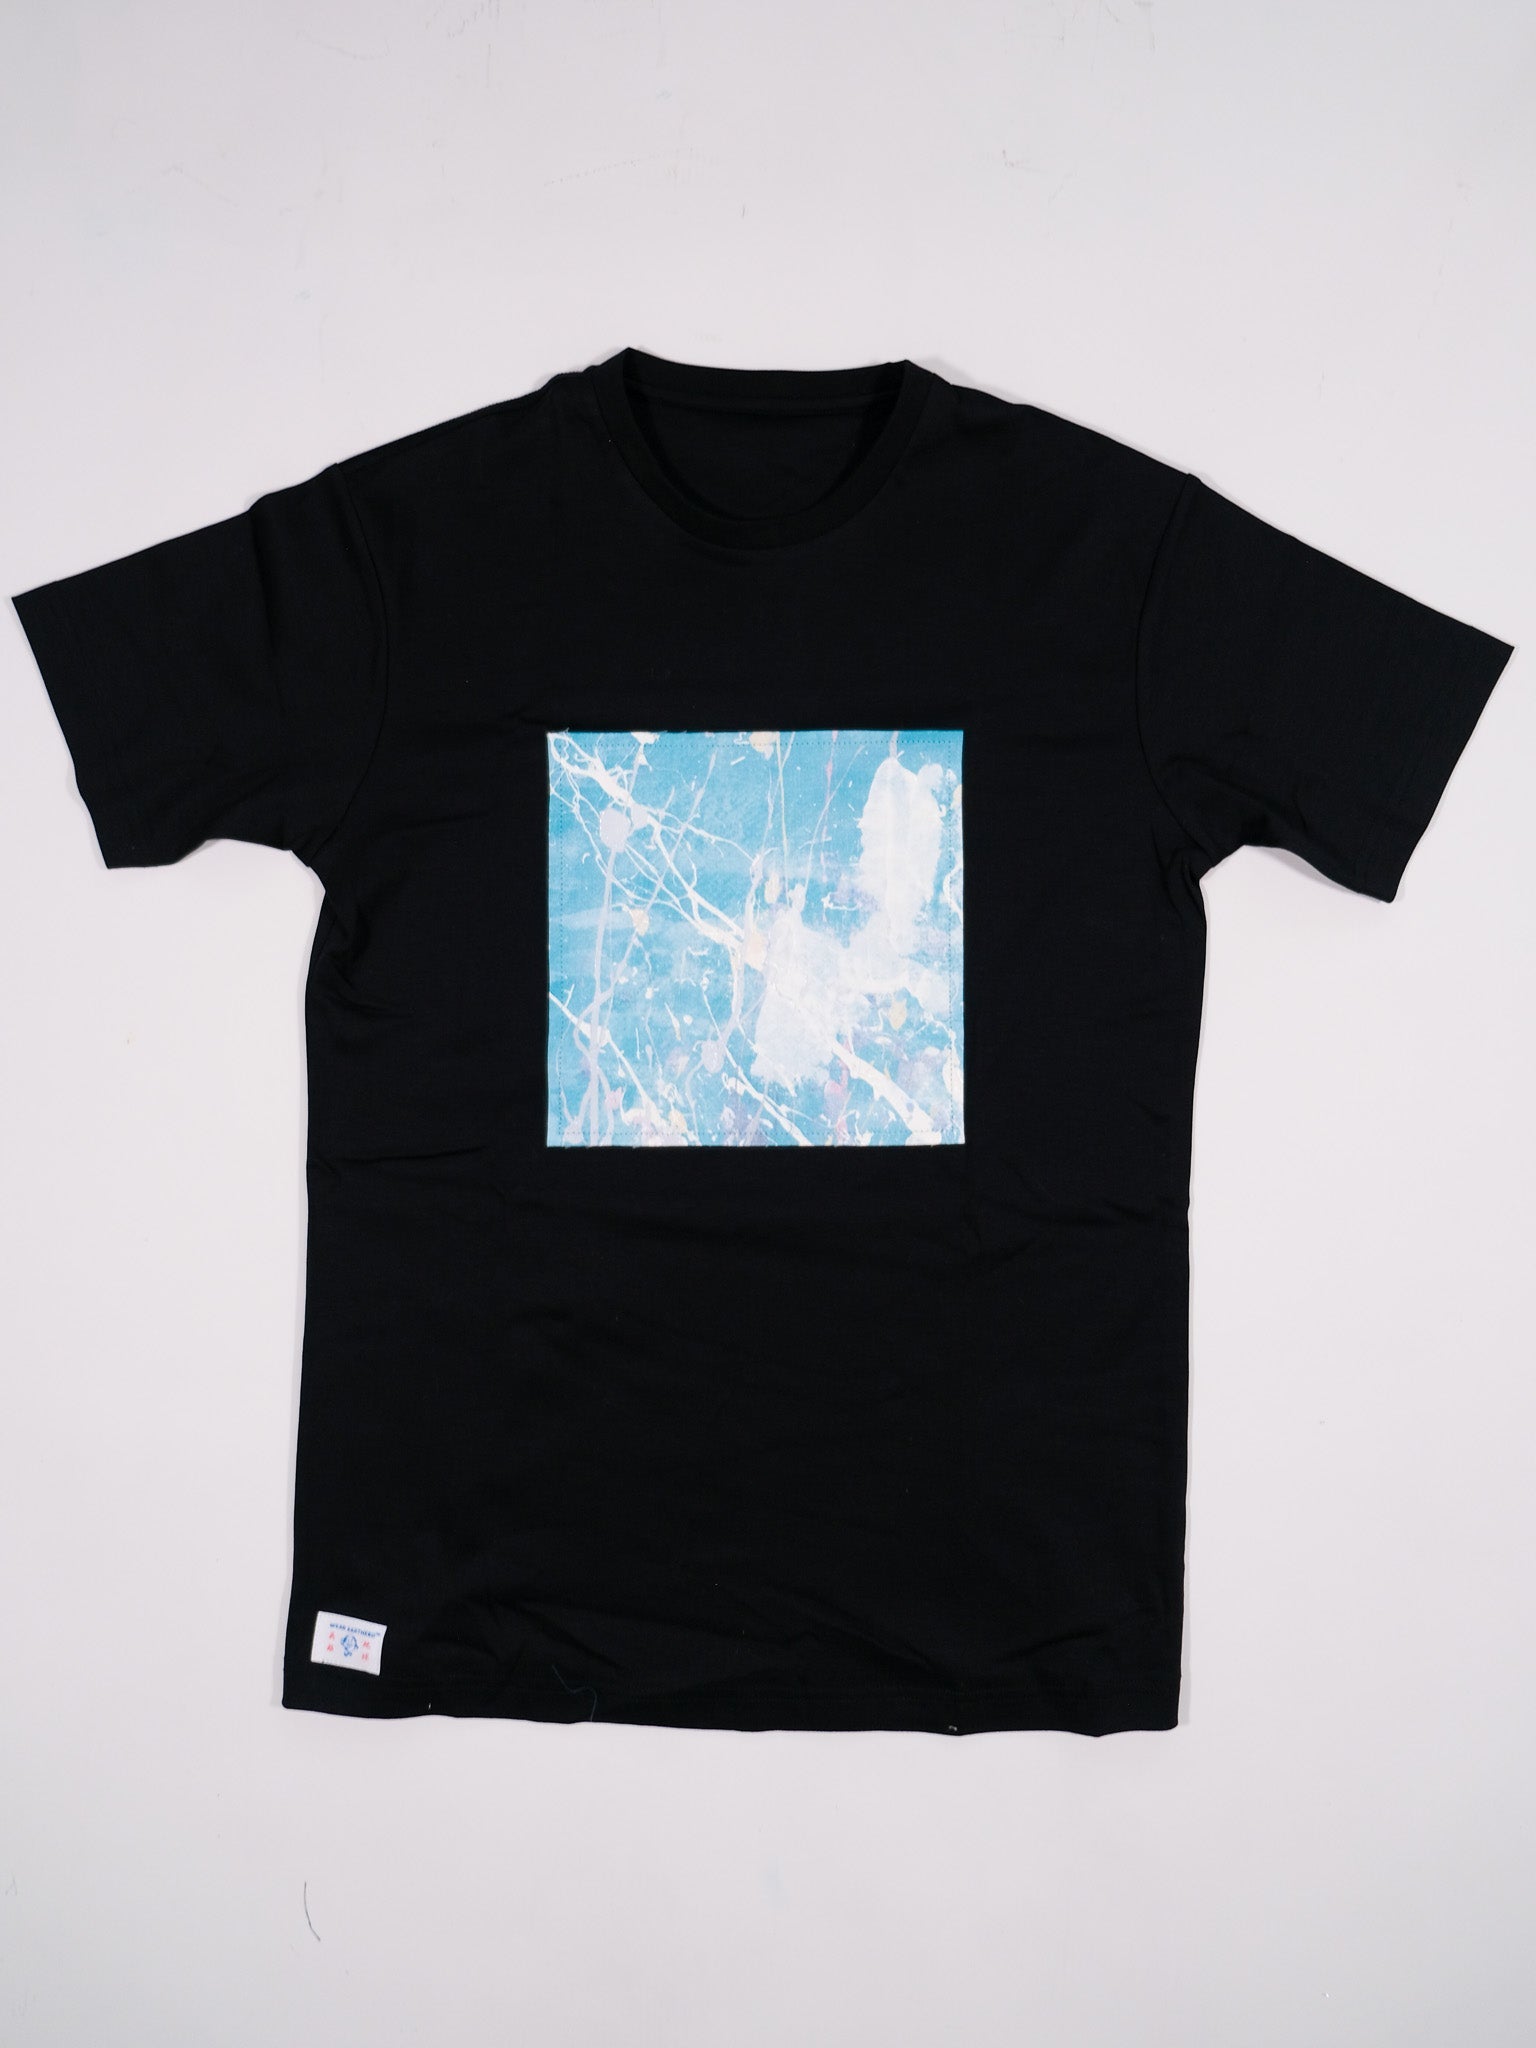 IRIS YUNG - Daydream Believer Art-isan Collective Patched T-Shirt No. 1 Medium